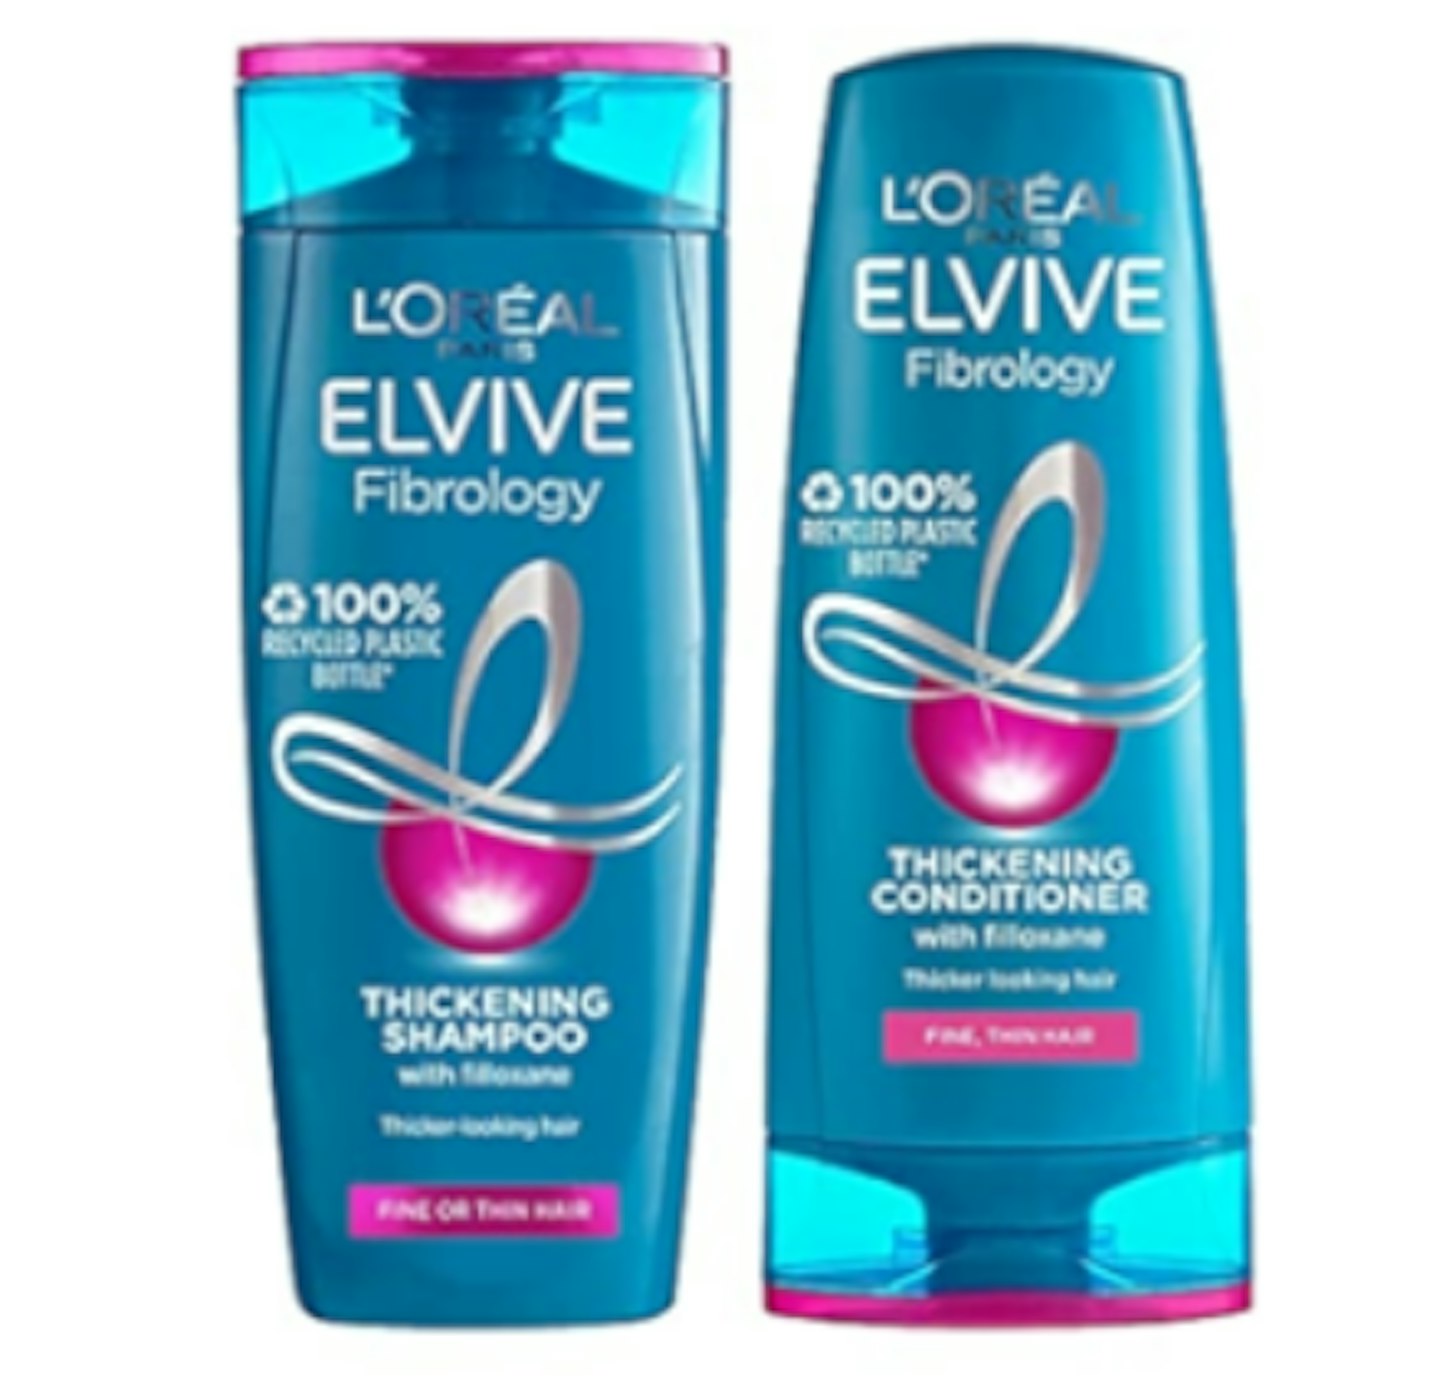 L'Oreal Elvive Fibrology Thickening Shampoo And Conditioner Set